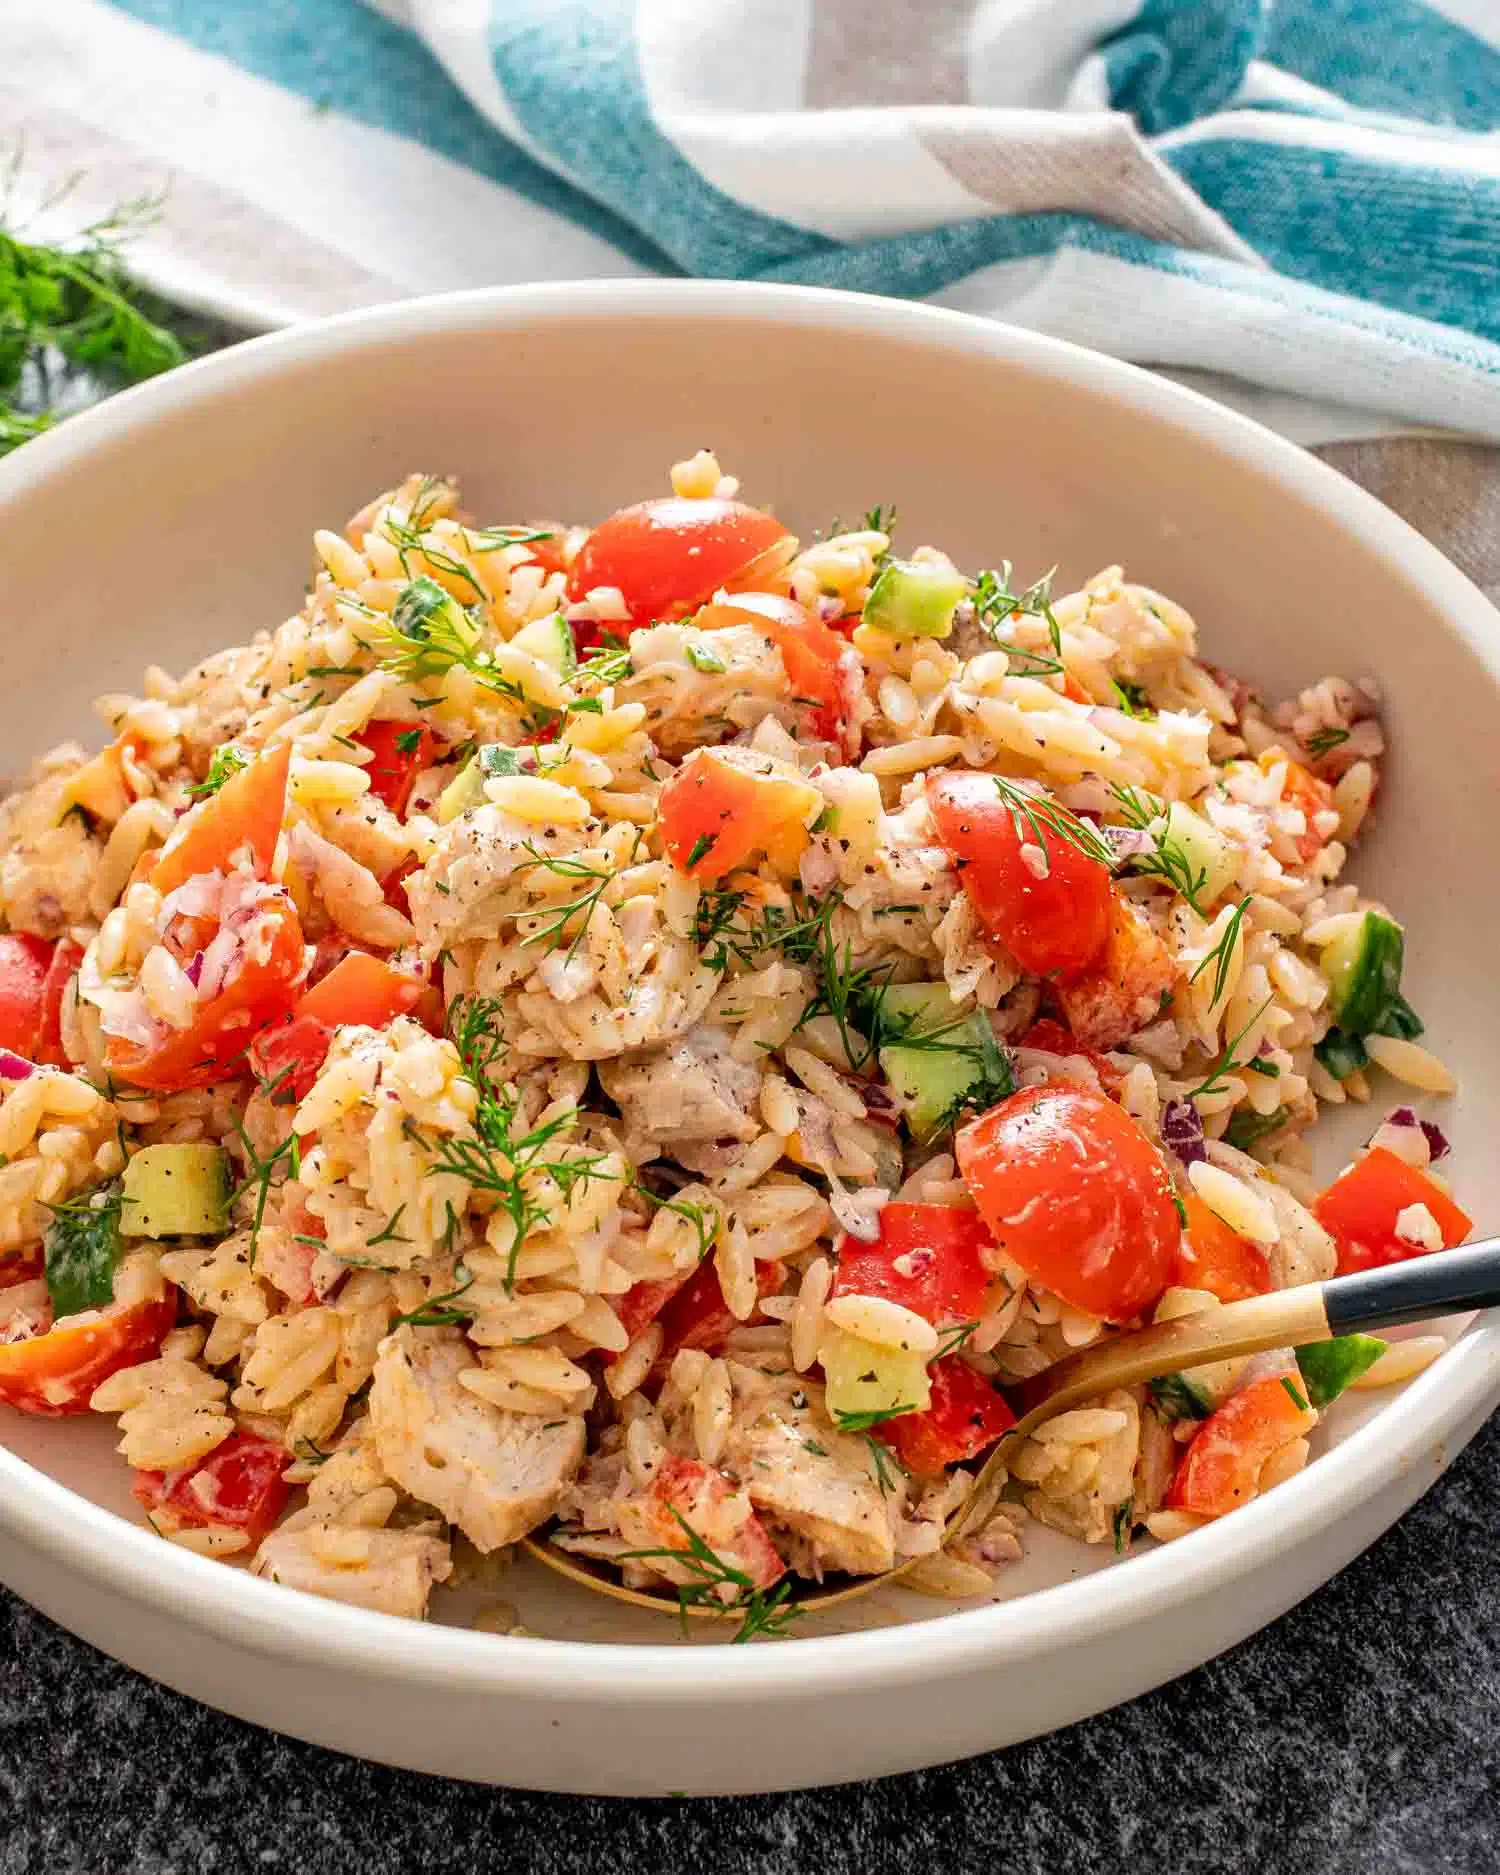 freshly made chicken orzo pasta salad in a white bowl.